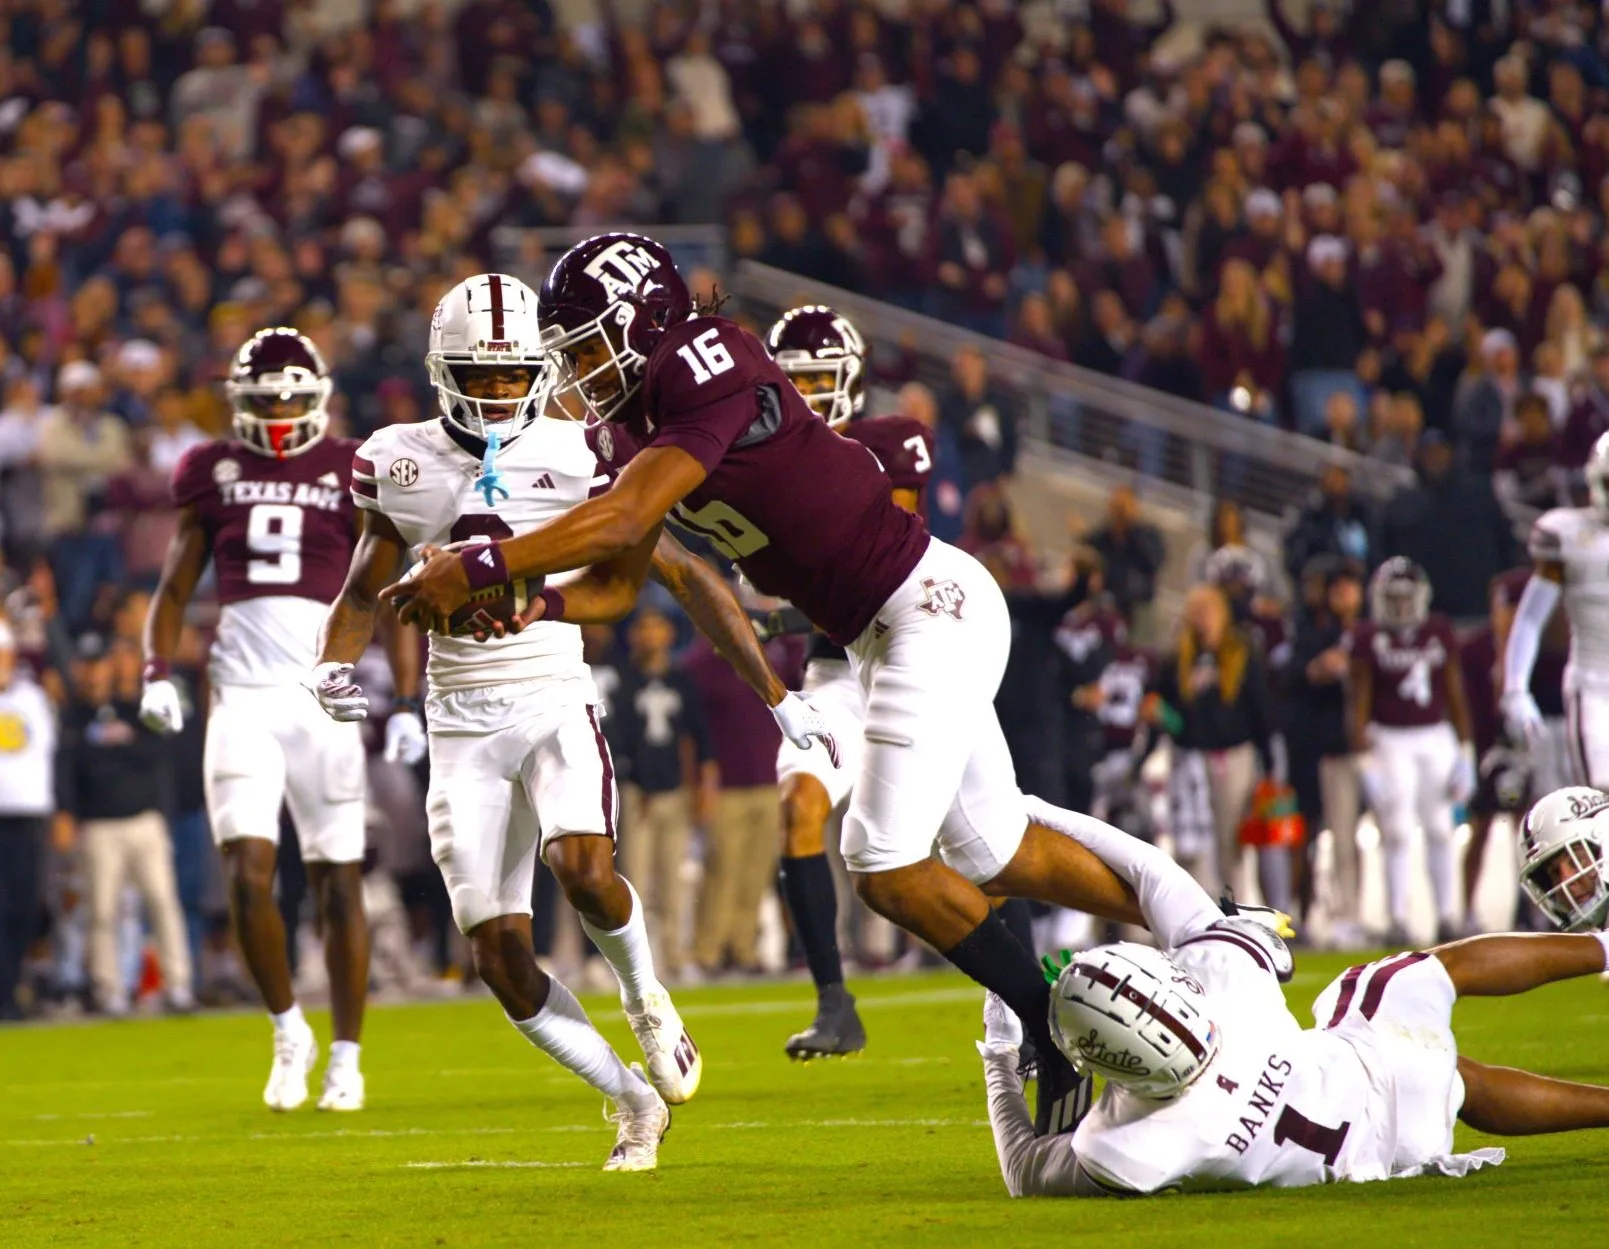 Texas A&M quarterback Jaylen Henderson (foreground) scores against Mississippi State in this photo, in what would be the final game for coach Jimbo Fisher in College Station. The Southeastern Conference on Thursday released kickoff times and the TV schedule for the first three weeks of the season, and several other games of note, such as the Florida-Georgia game, the Egg Bowl between Mississippi State and Ole Miss, Georgia and Georgia Tech's annual battle, and the SEC Championship Game. (Photo by ALEX NABOR - THE FOOTBALL BEAT)